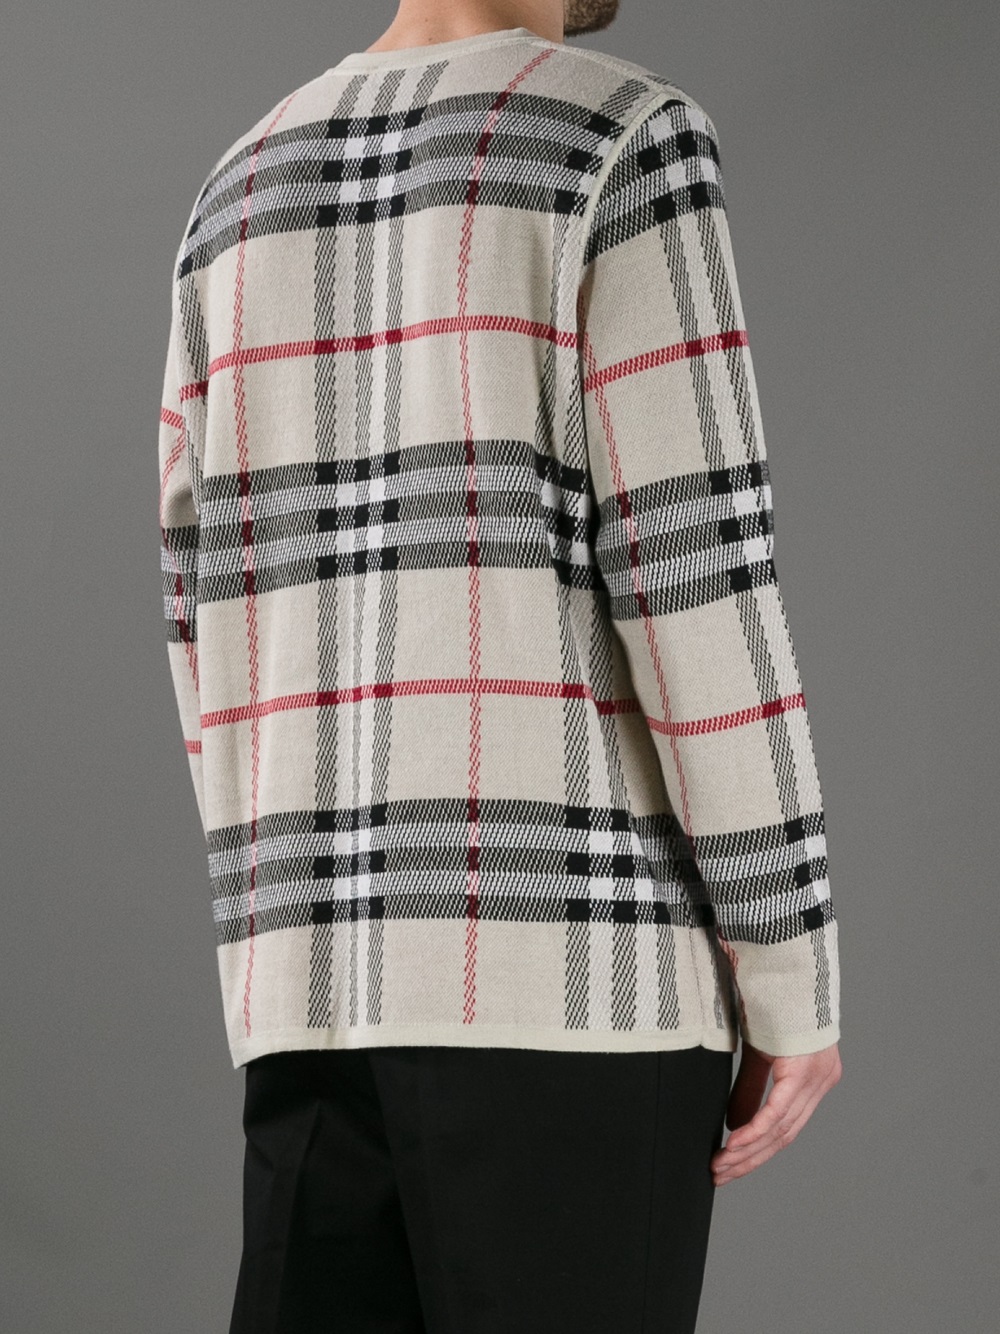 Burberry Checked Print Sweater in Beige (Natural) for Men - Lyst